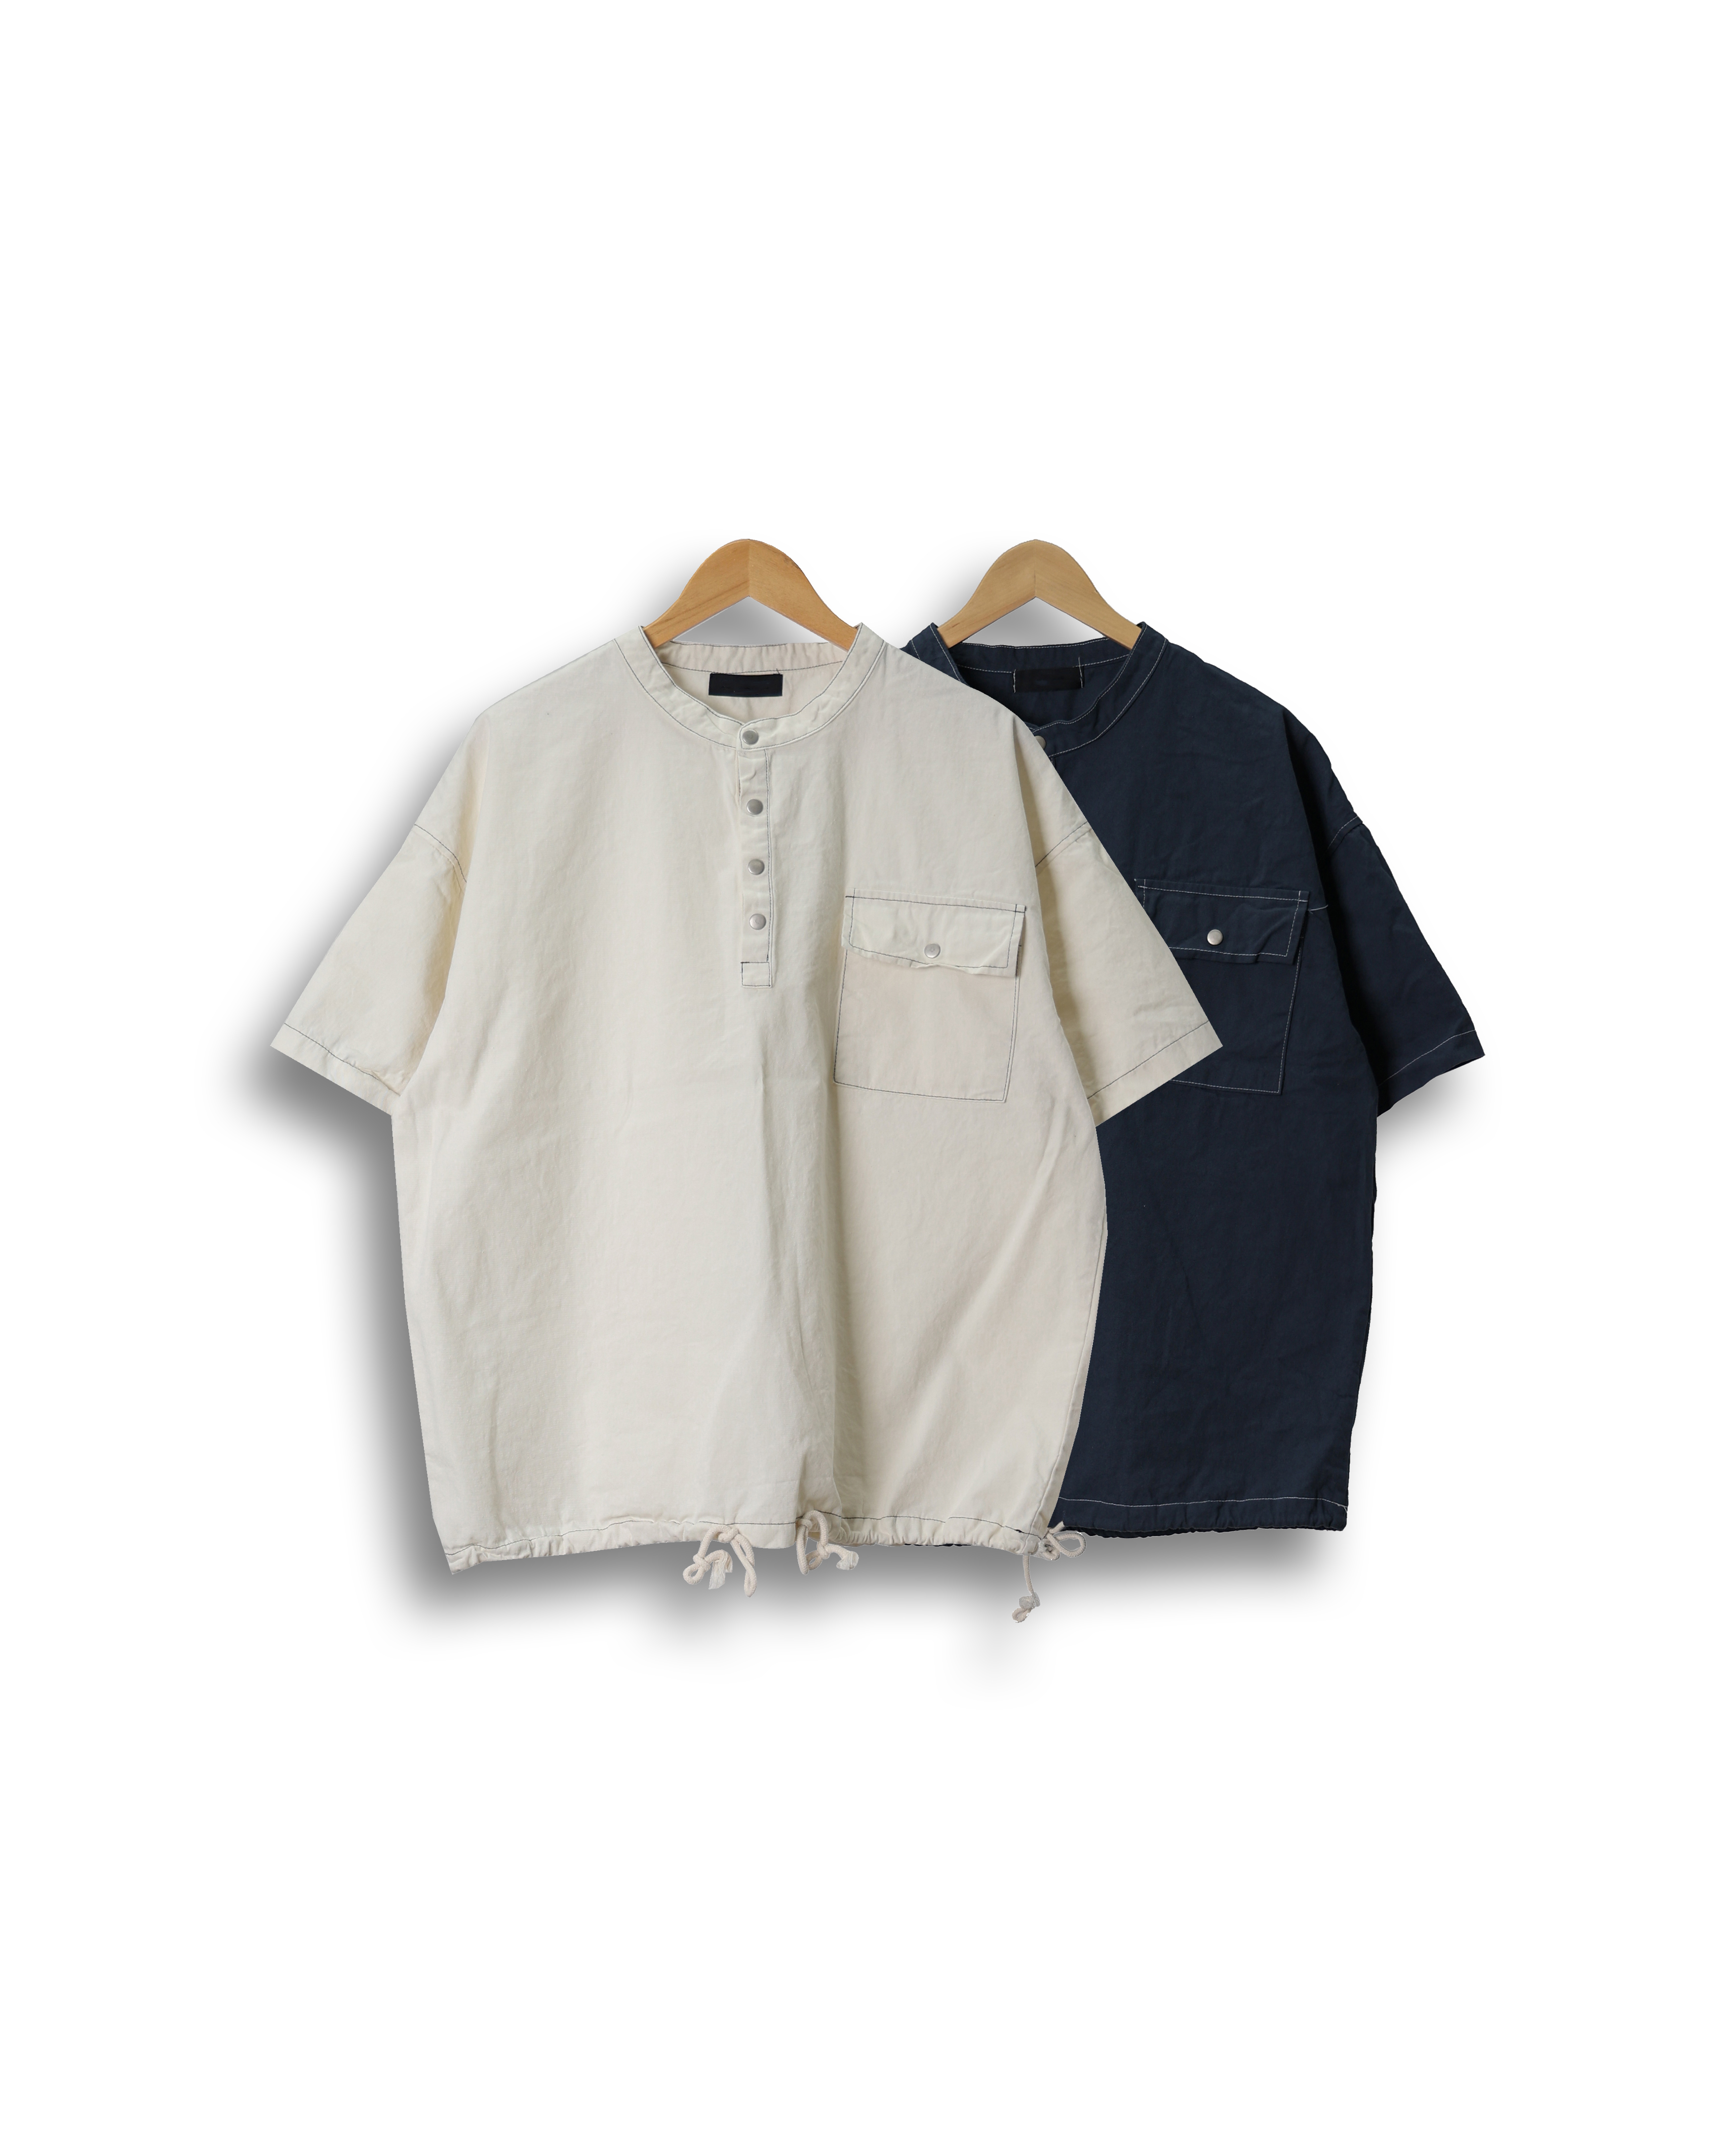 NOTIC Stitch Washed Hernley T Shirts (Navy/Ivory)